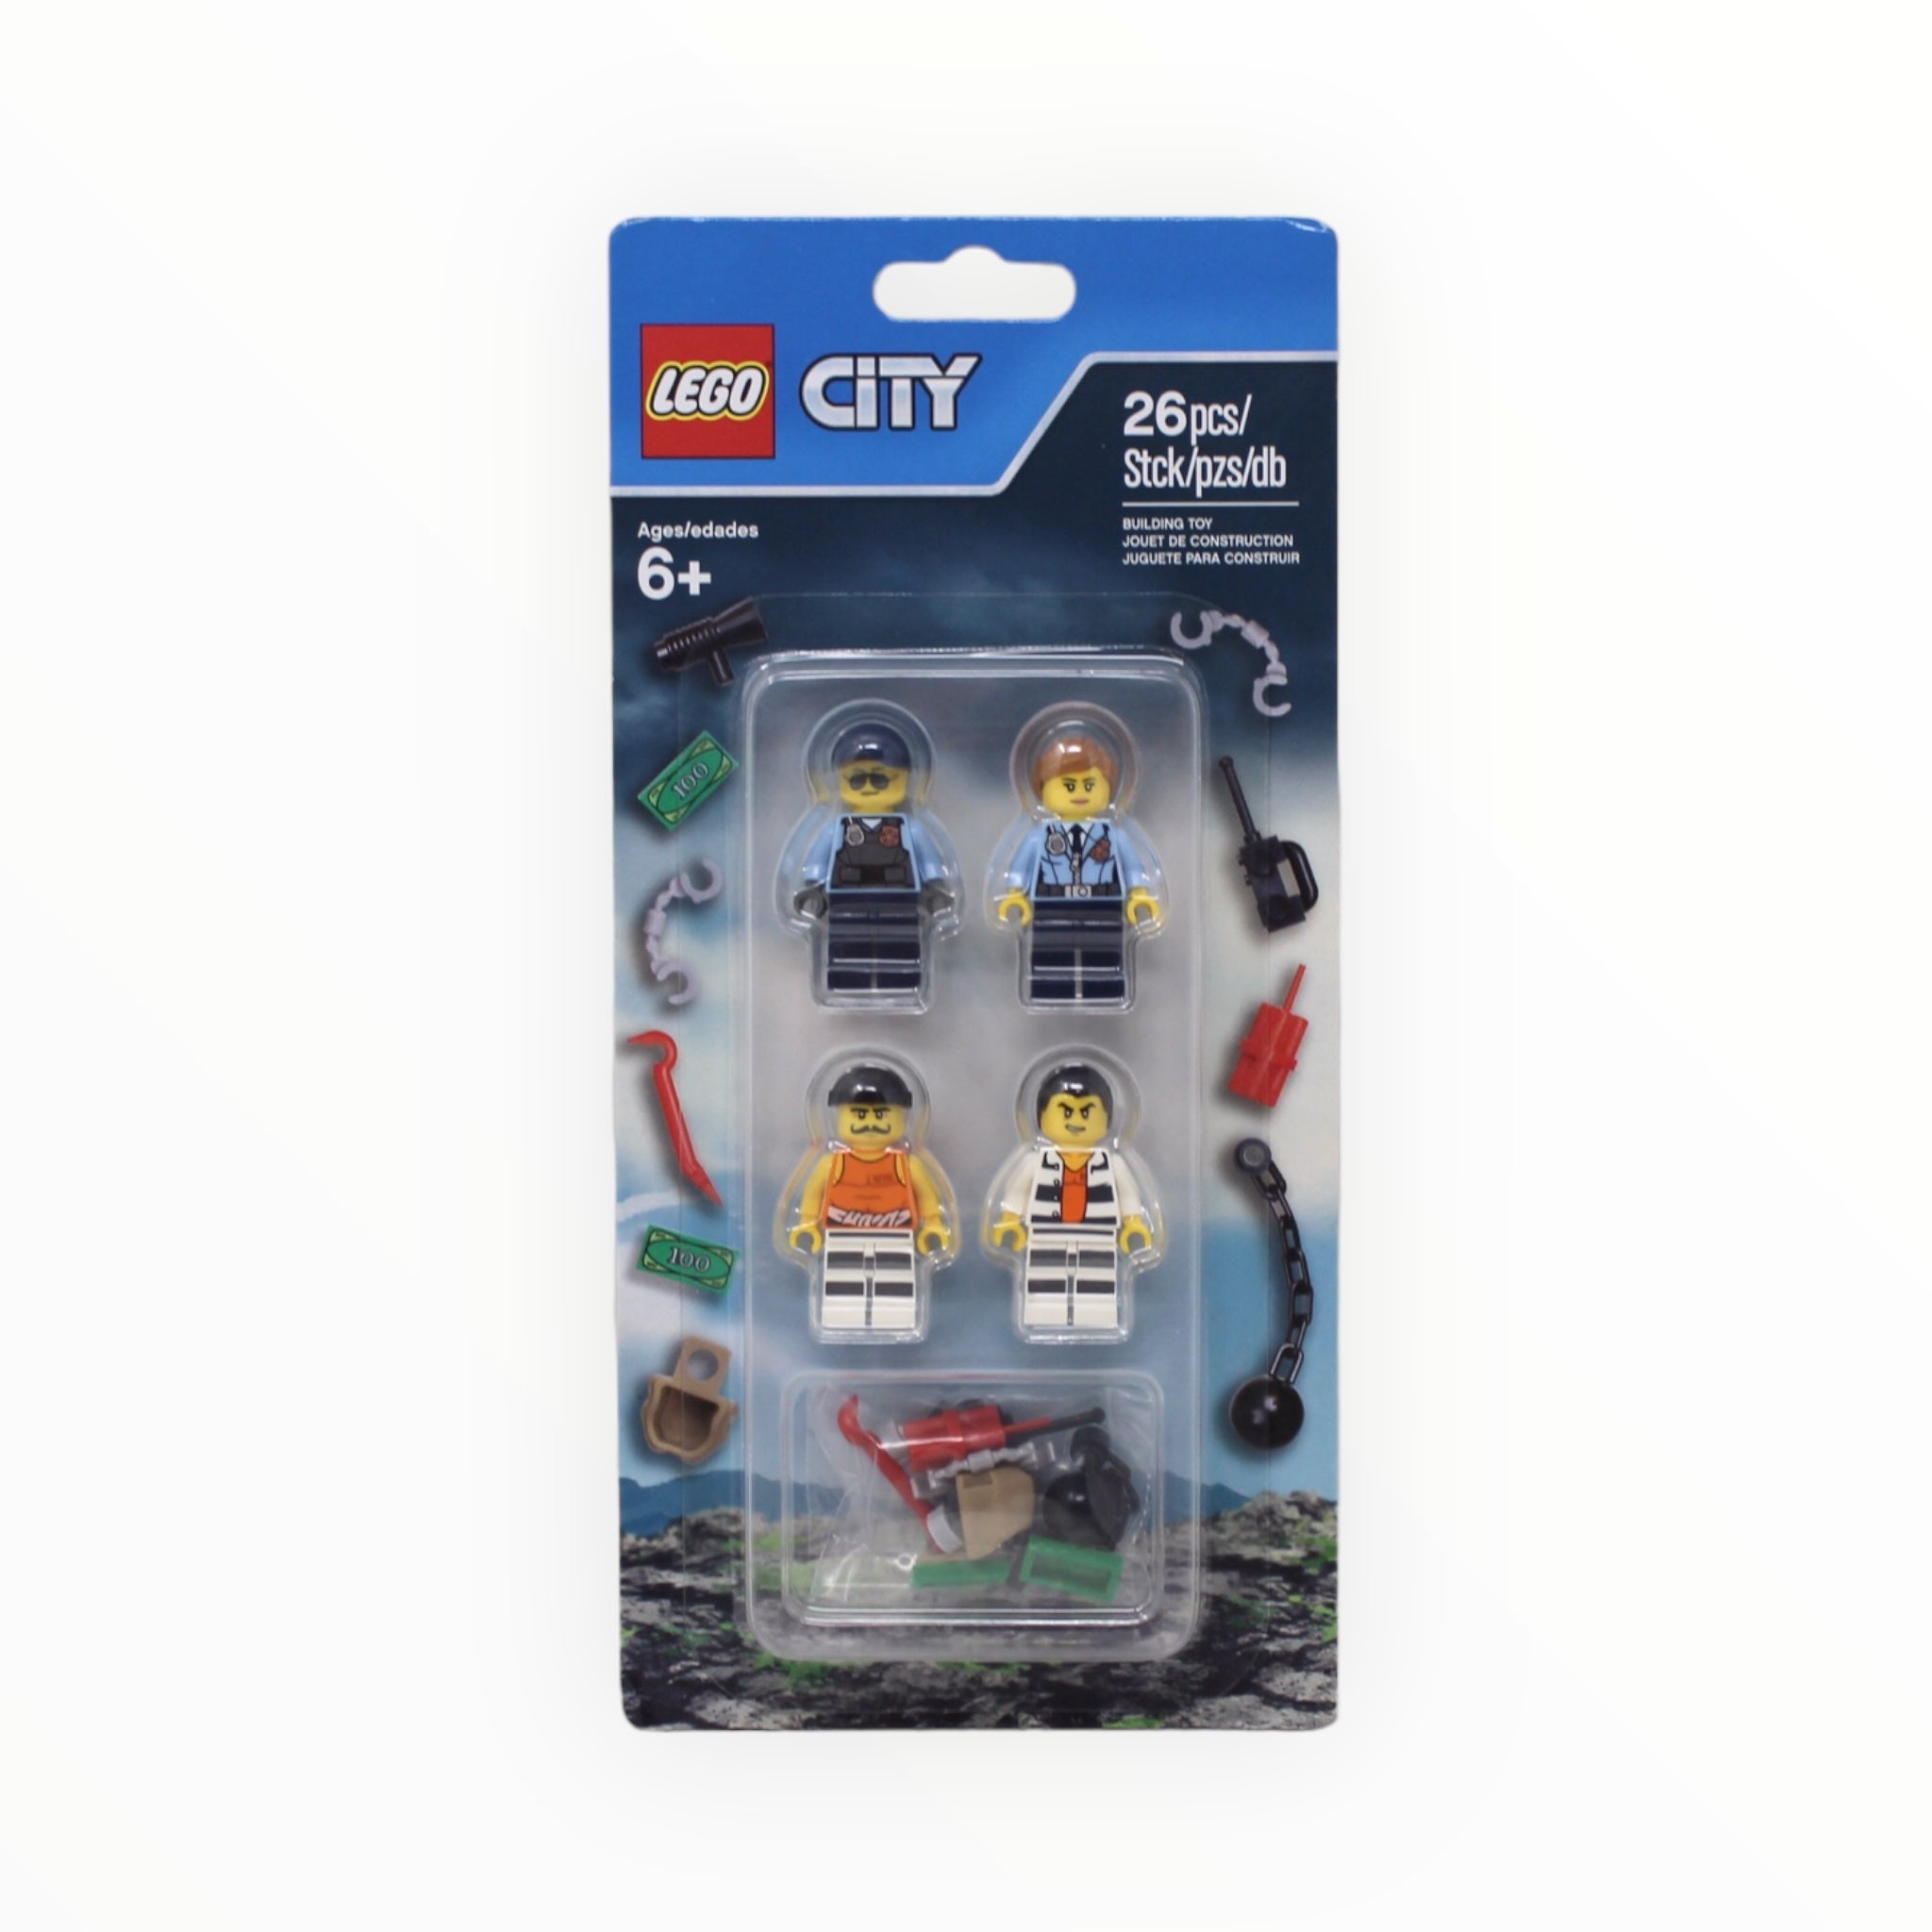 Retired Set 853570 City 2016 Police Accessory Blister Pack